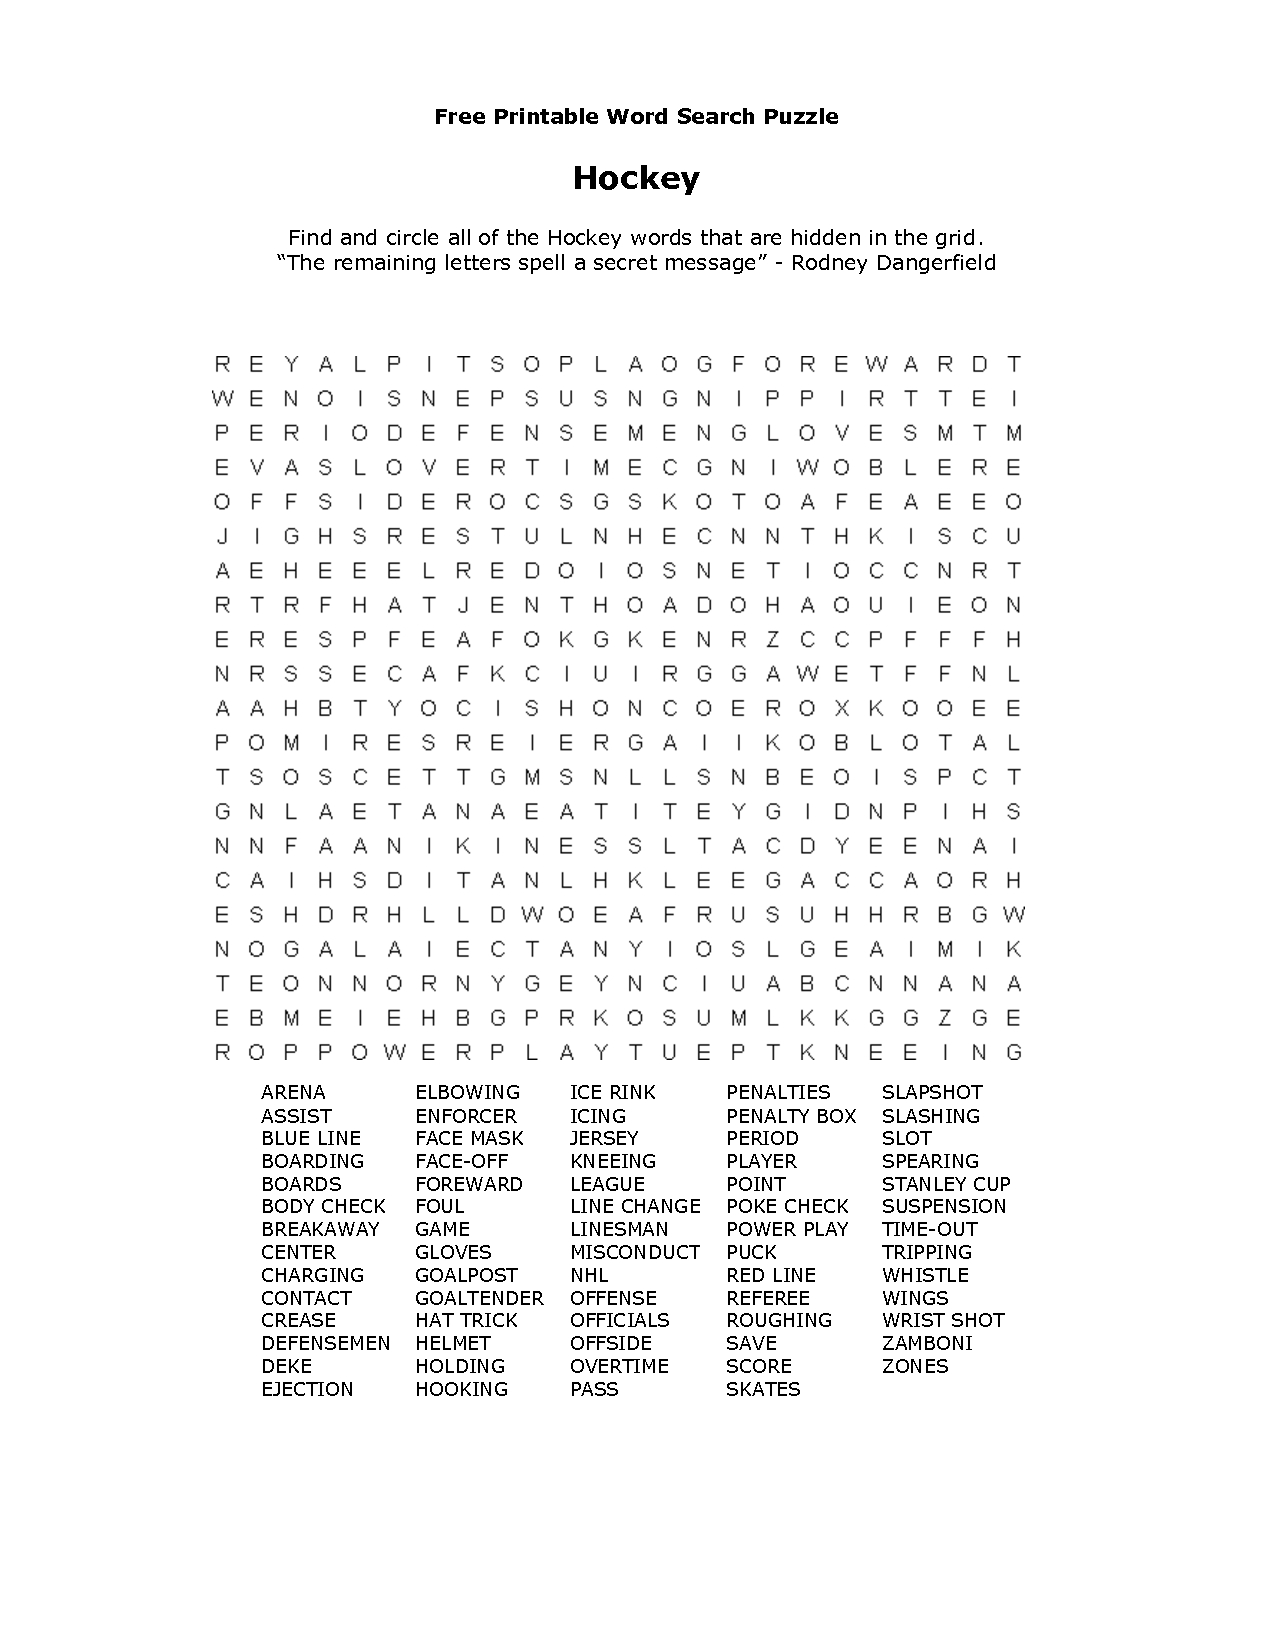 Free Printable Word Searches | طلال | Free Printable Word Searches - Free Printable Word Searches And Crossword Puzzles